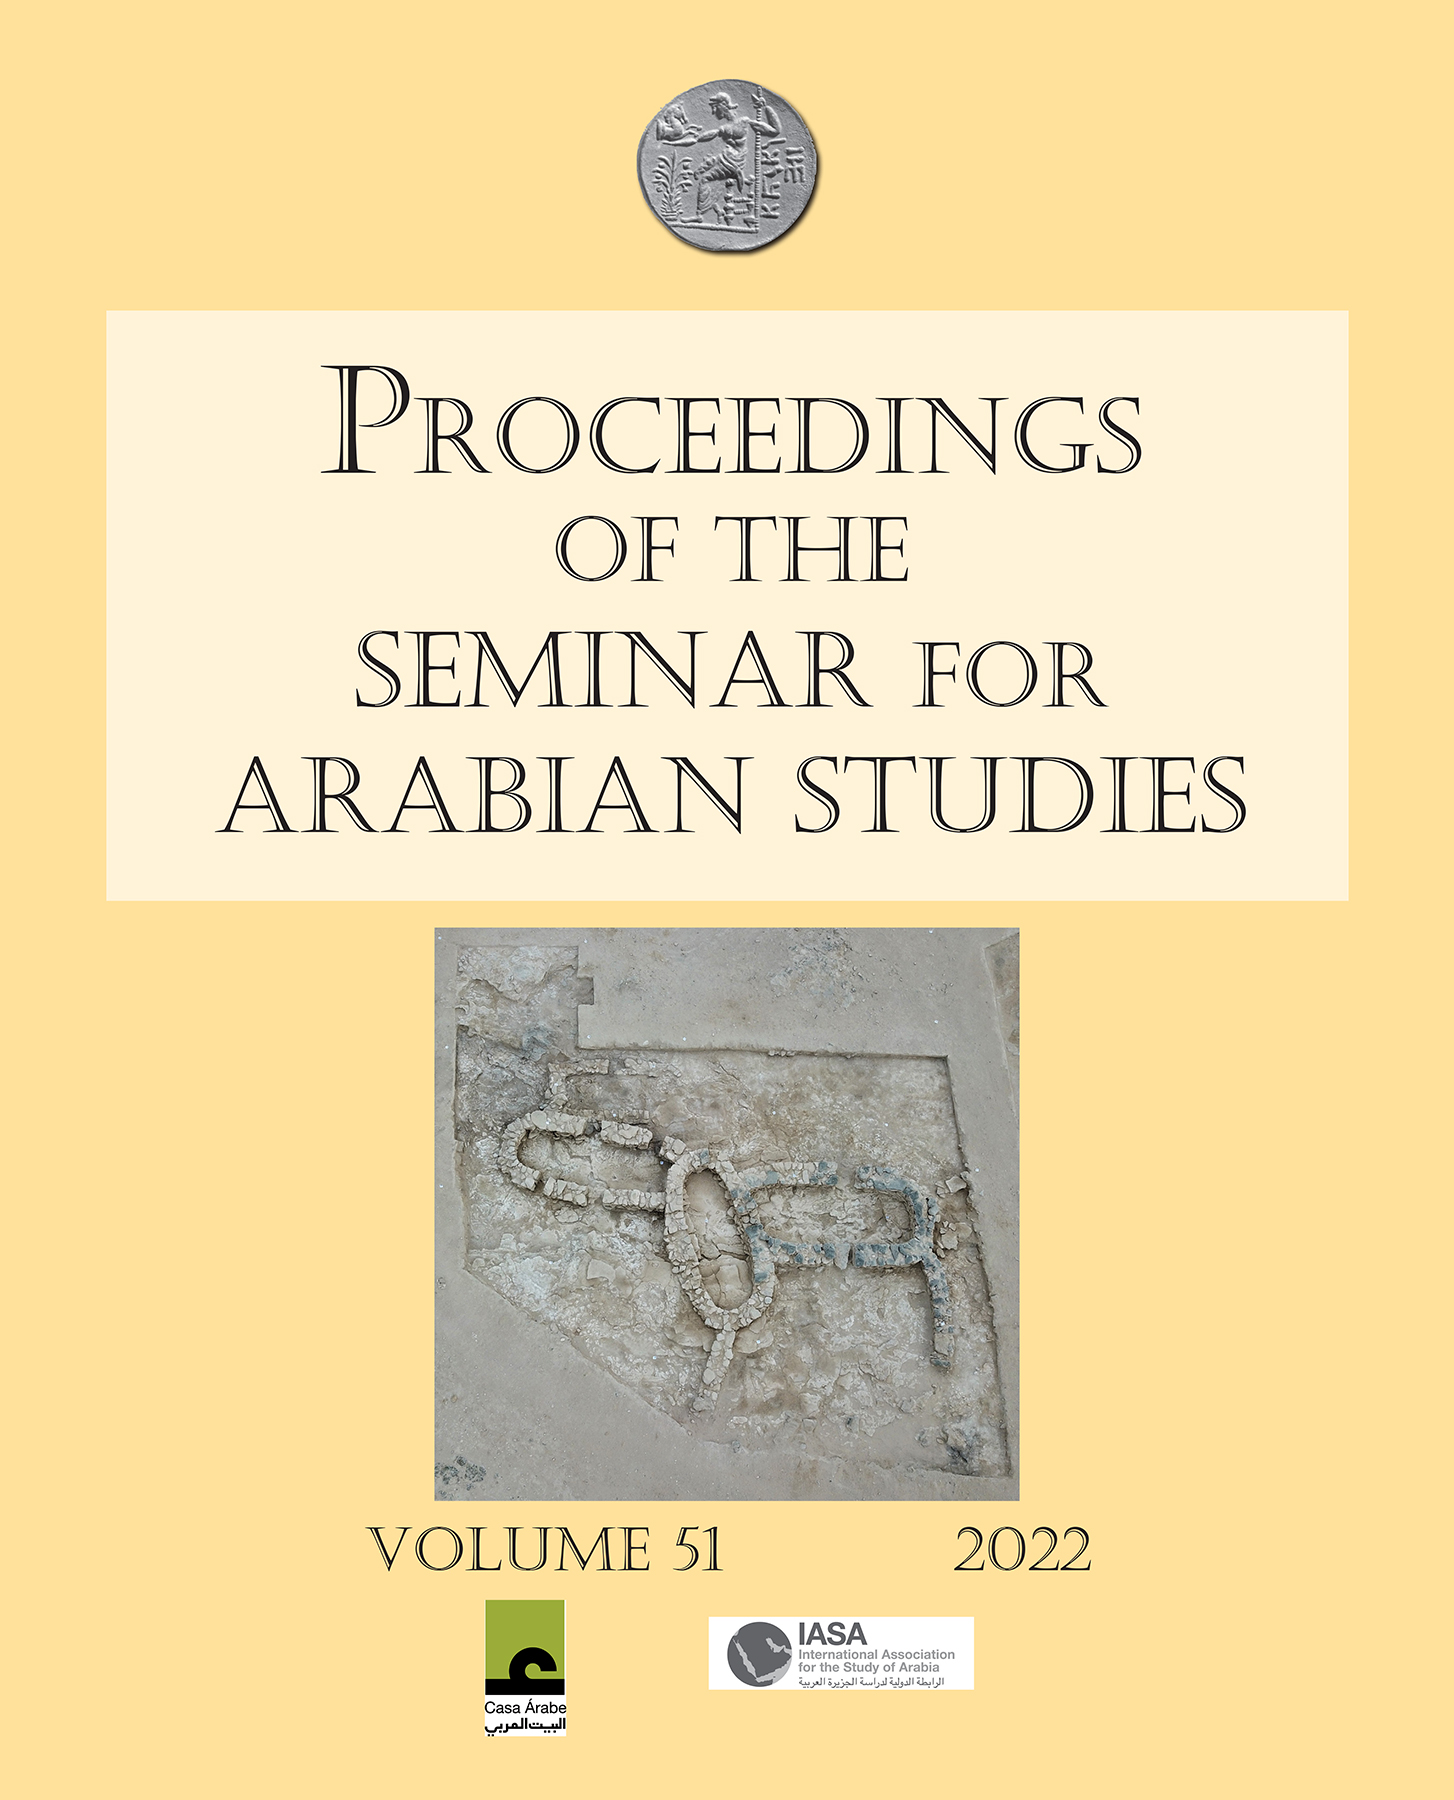 					View Vol. 51 (2022): Proceedings of the Seminar for Arabian Studies Volume 51 2022: Papers from the fifty-fourth meeting of the Seminar for Arabian Studies held virtually on 2–4 and 9–11 July 2021
				